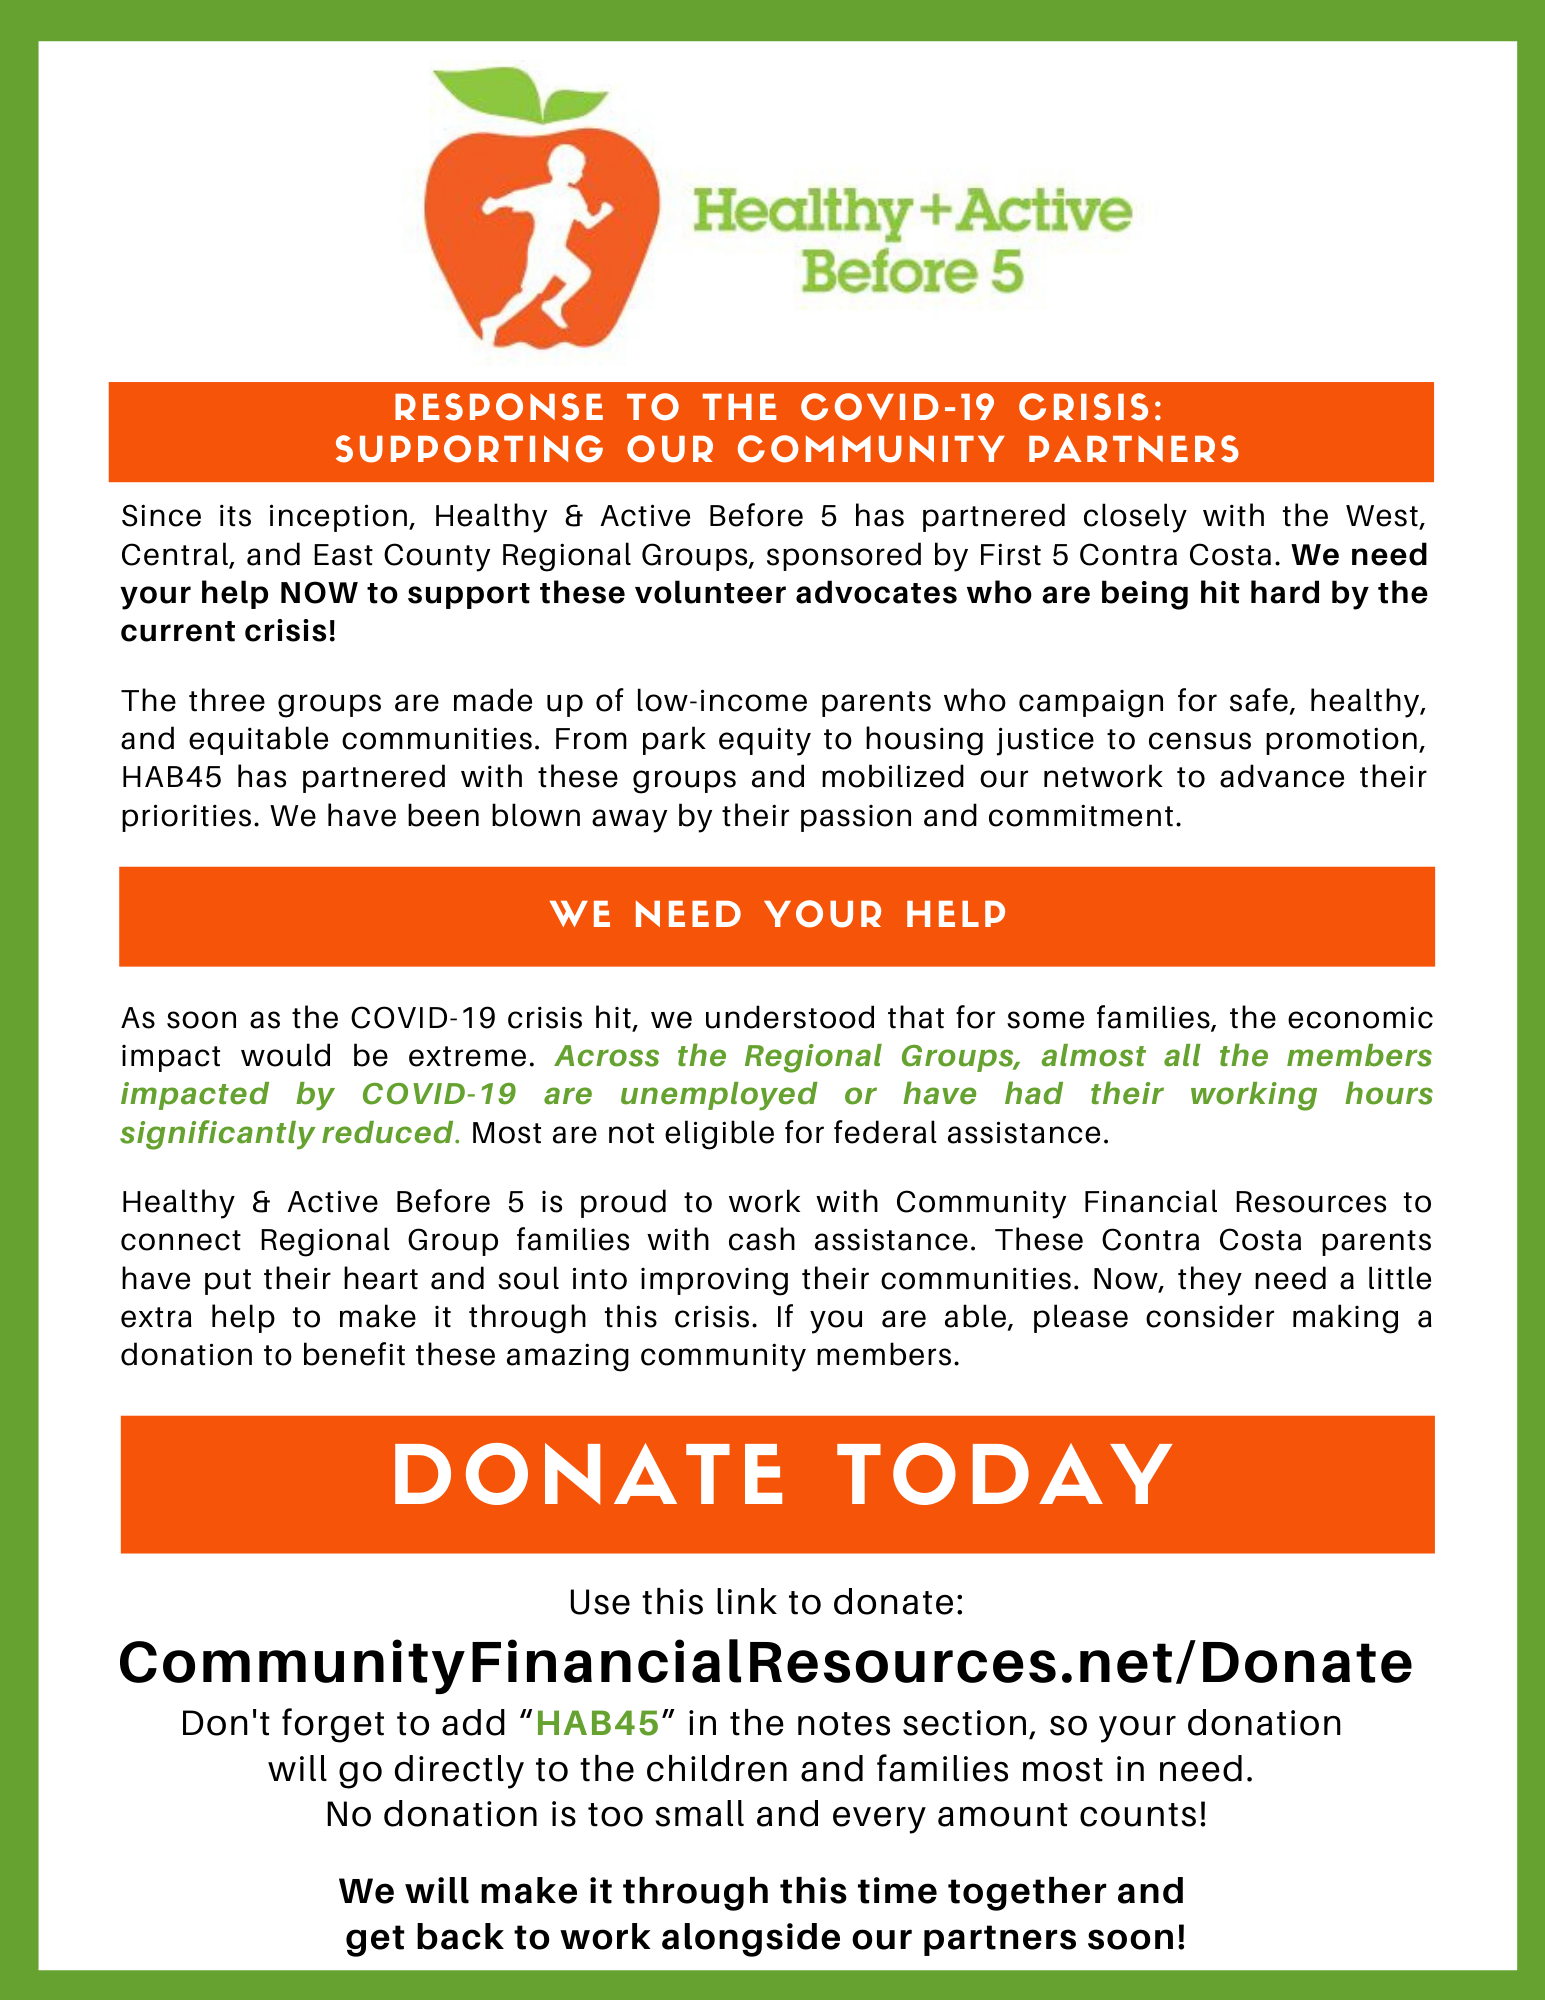 Community Financial Resources